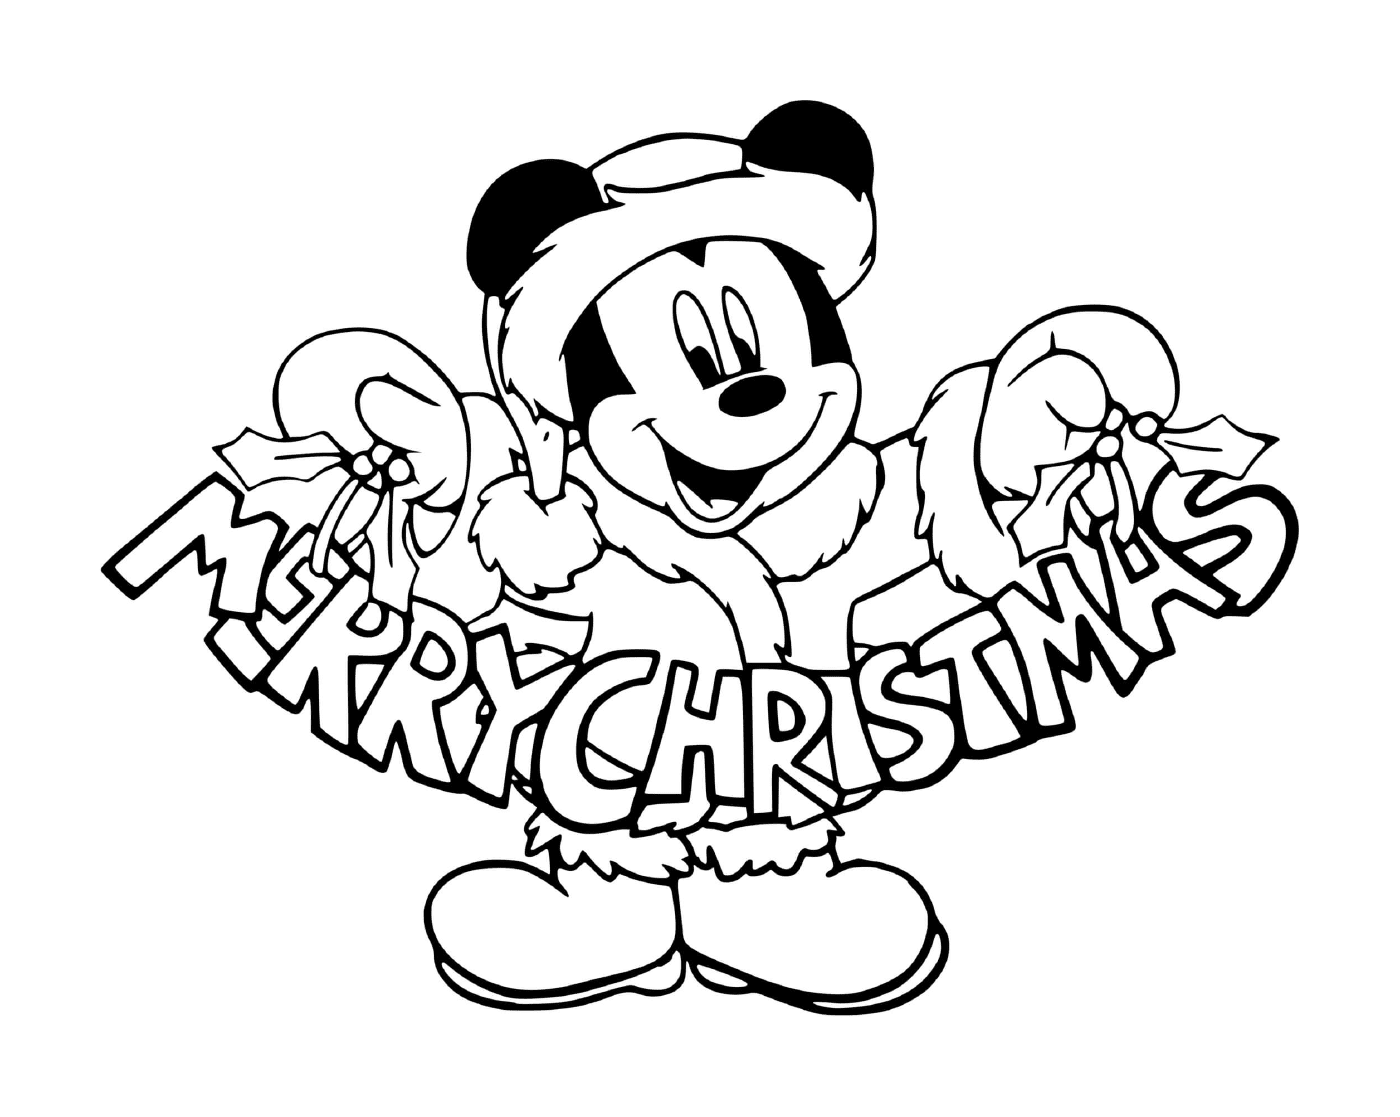  Mickey with a Happy Christmas sign 